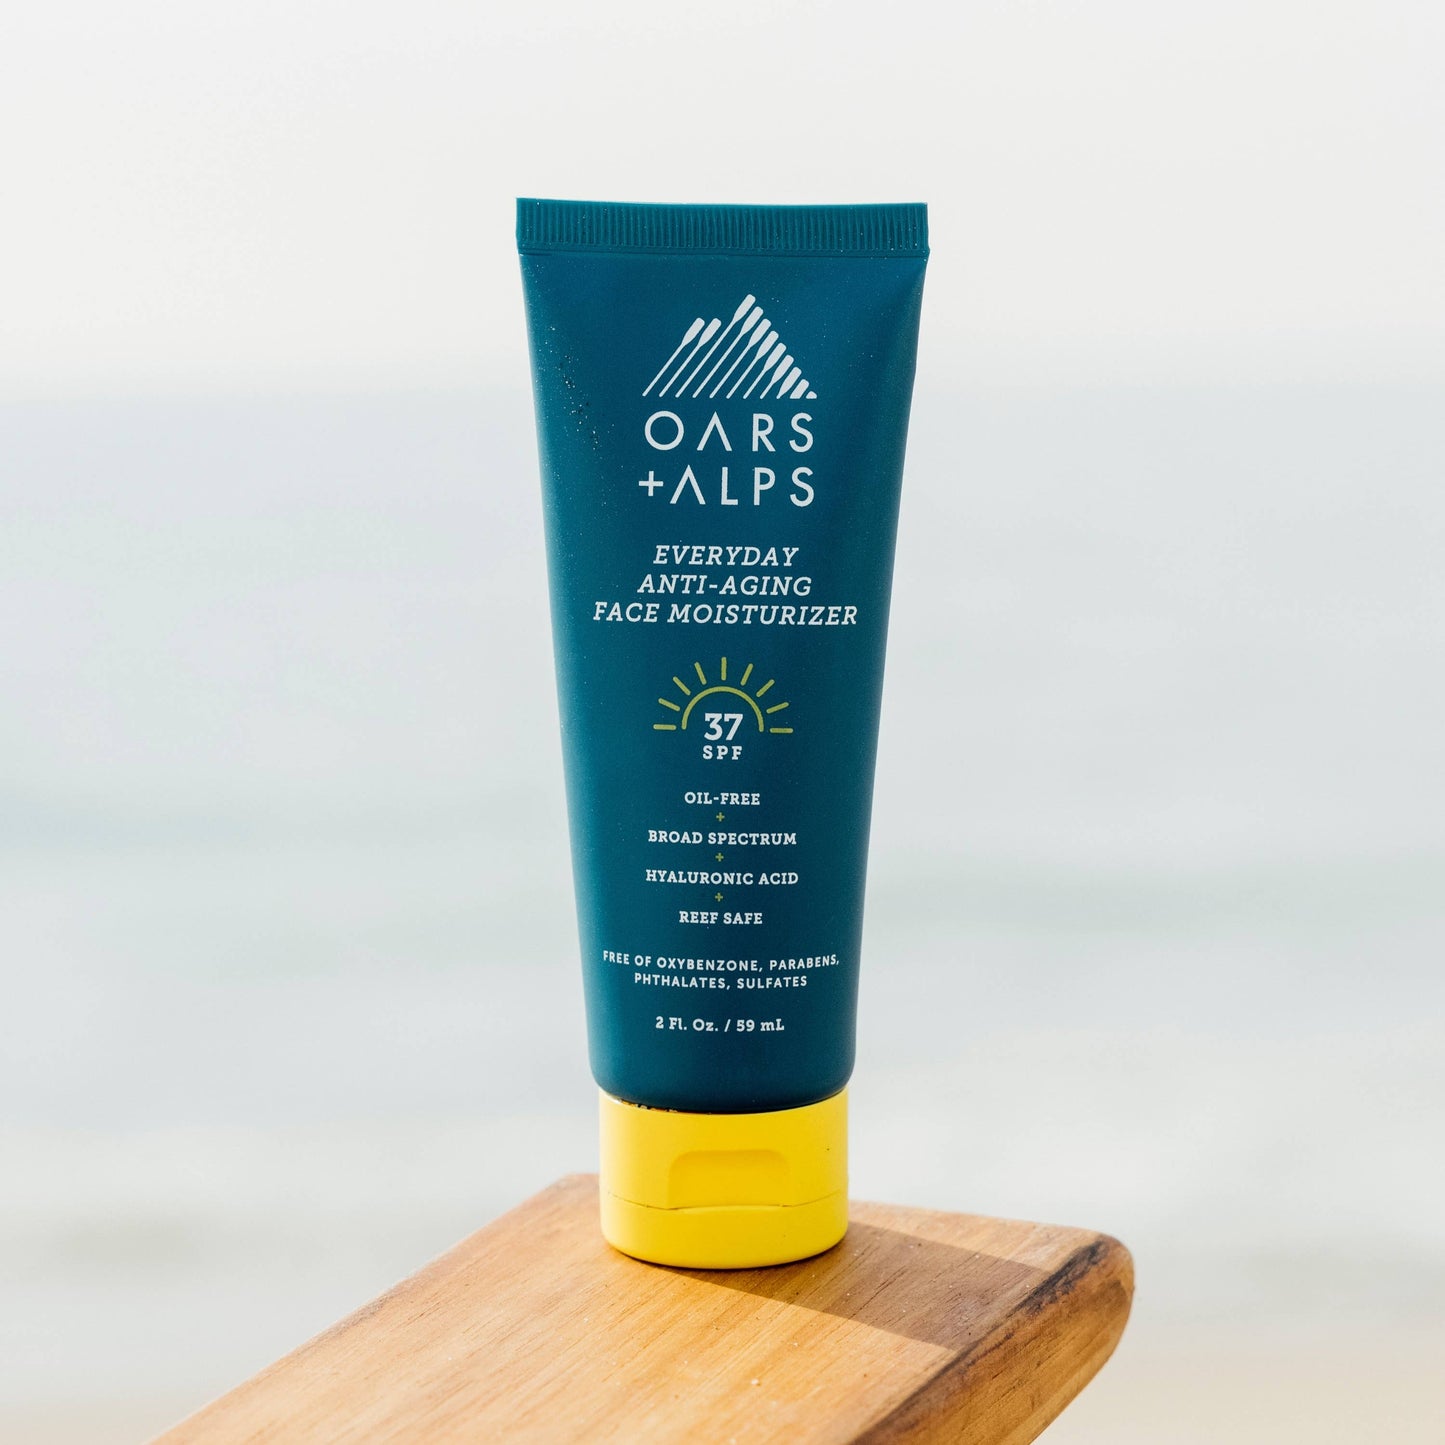 Oars and Alps - Everyday Anti-Aging Face Moisturizer w/ SPF 37